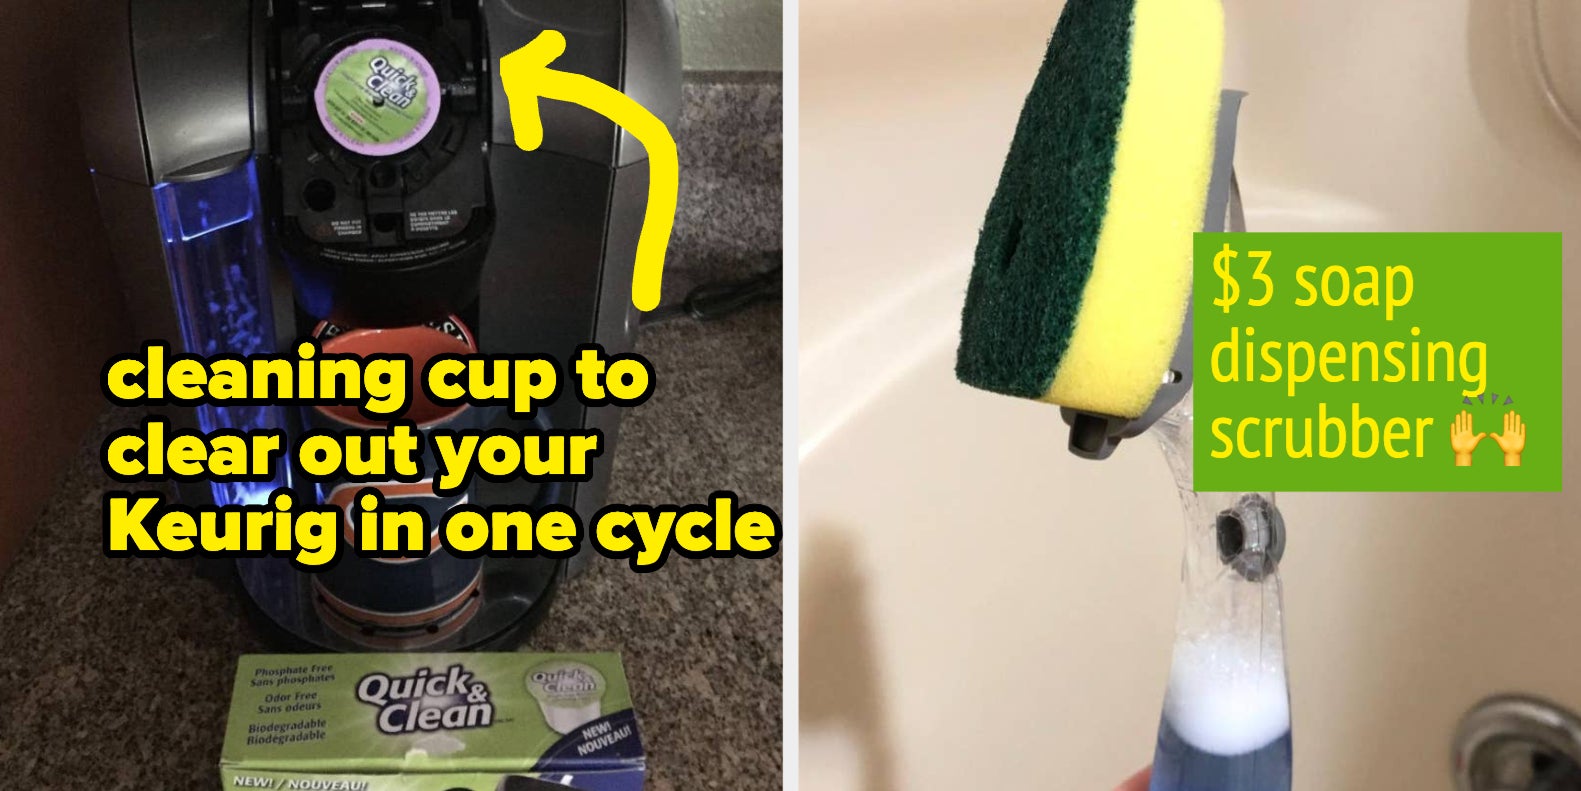 How to Refill your Swiffer - Adventures of a Nurse